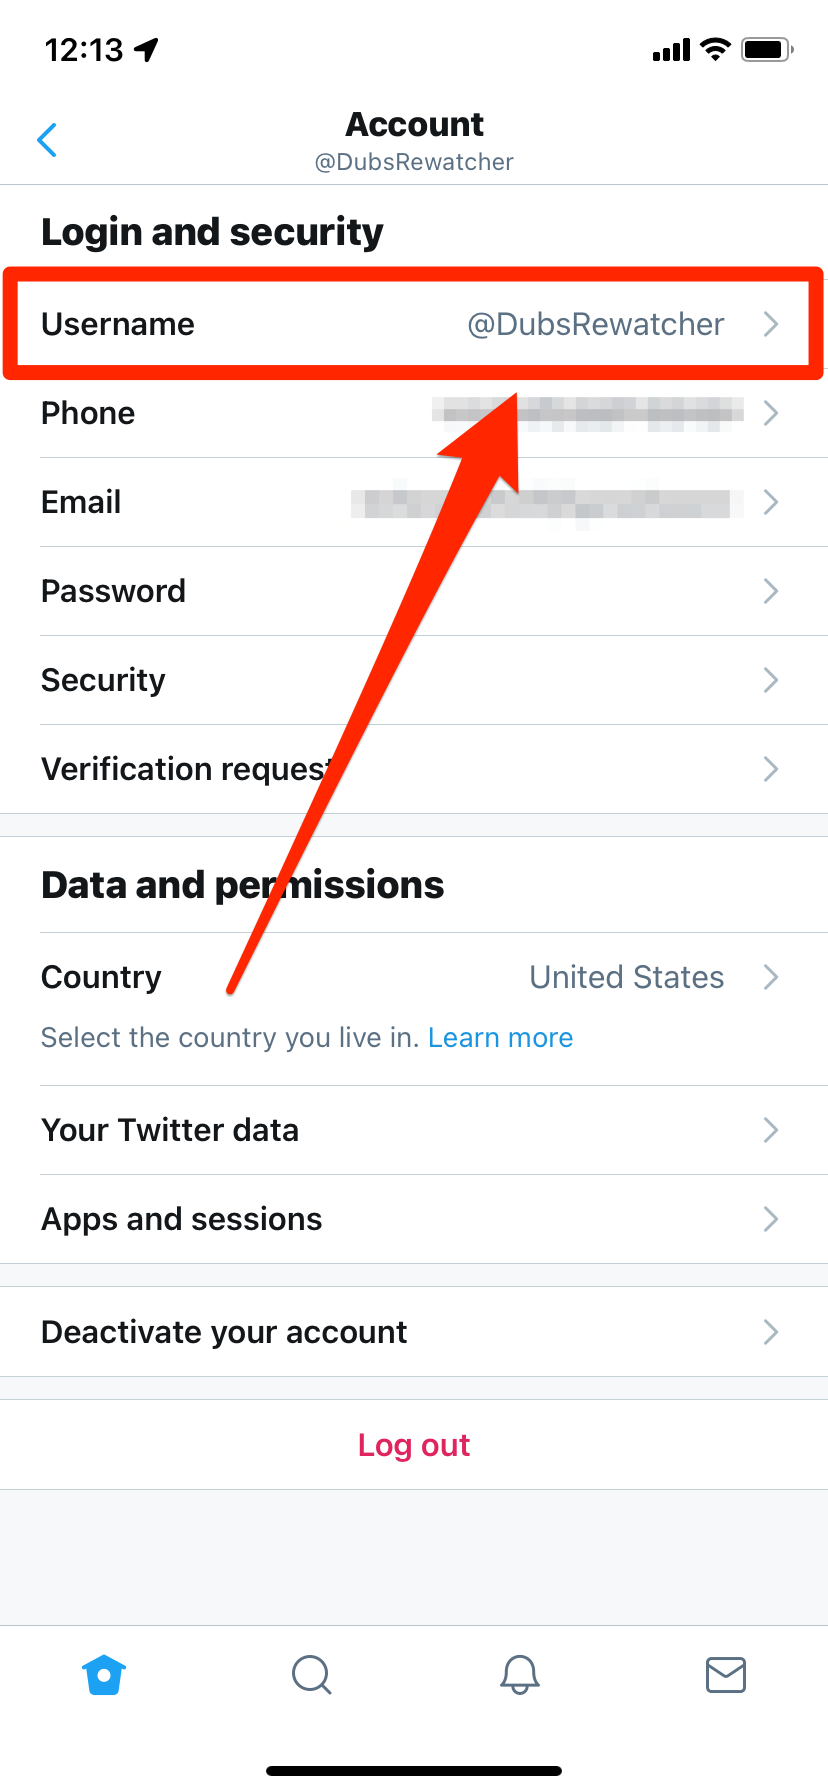 The Login and security menu of the Twitter app, with the "Username" option highlighted.